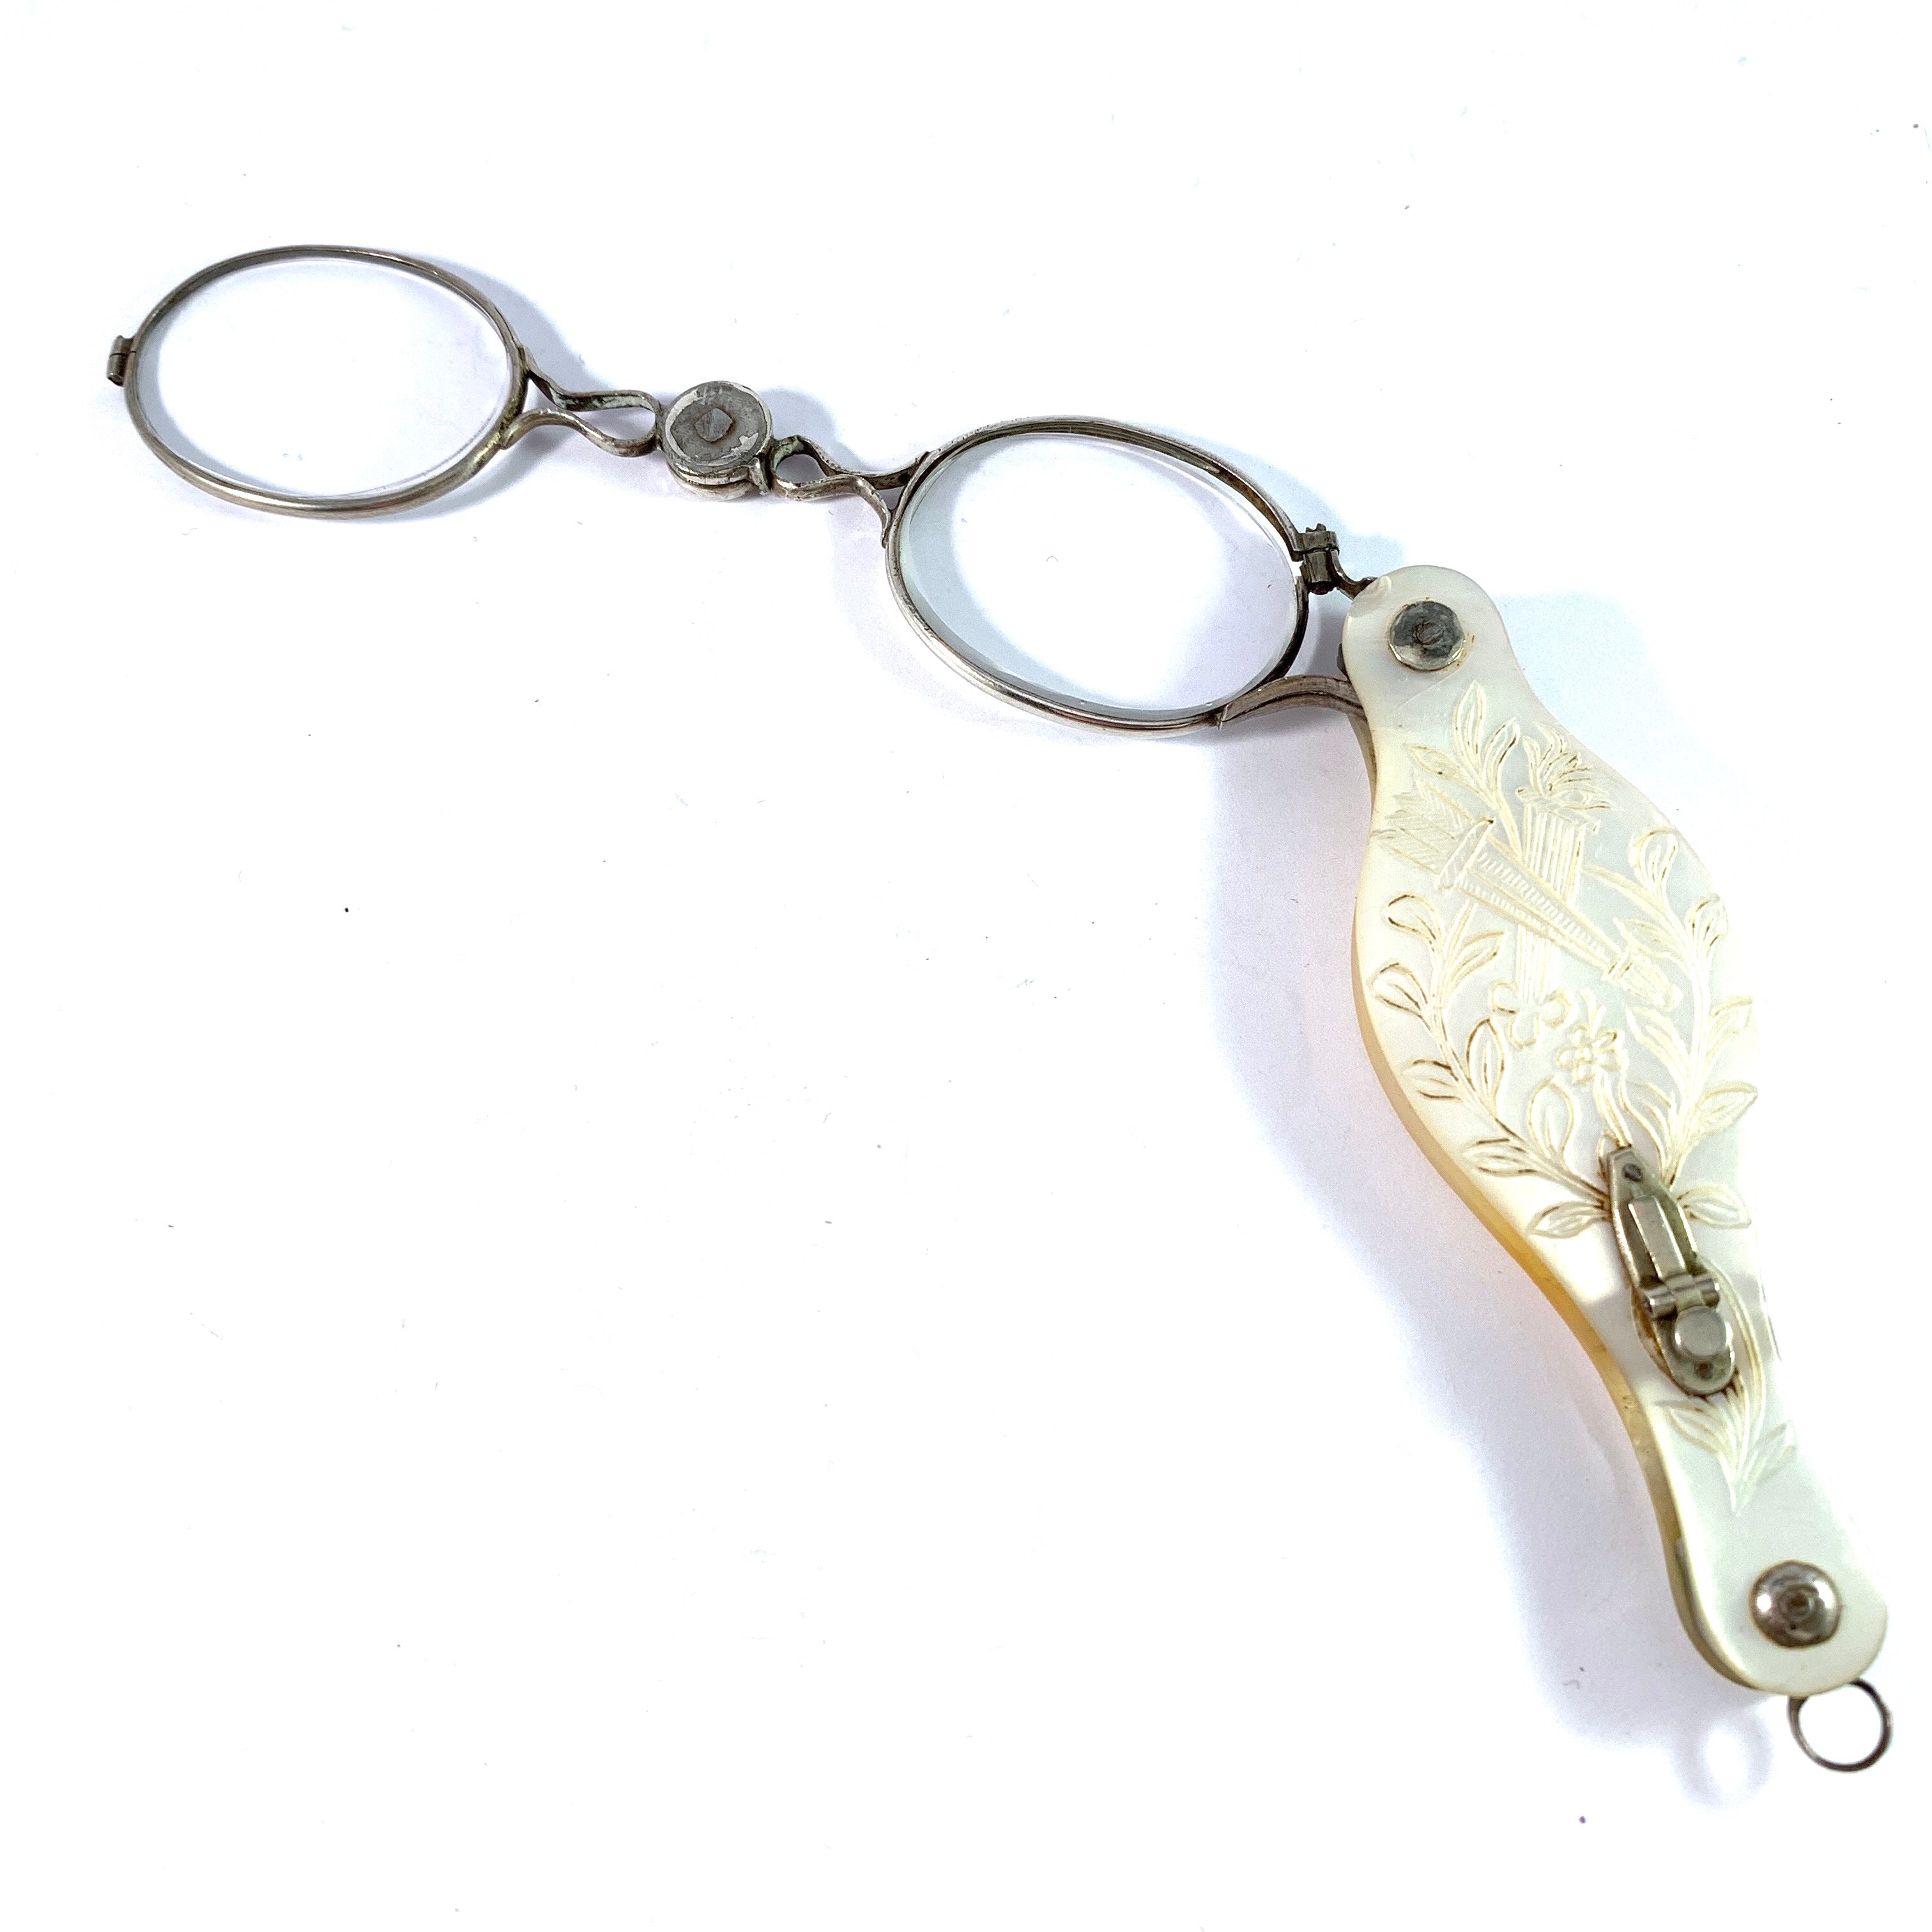 Antique c year 1900. Mother of Pearl Metal Lorgnette Glasses Pendant.